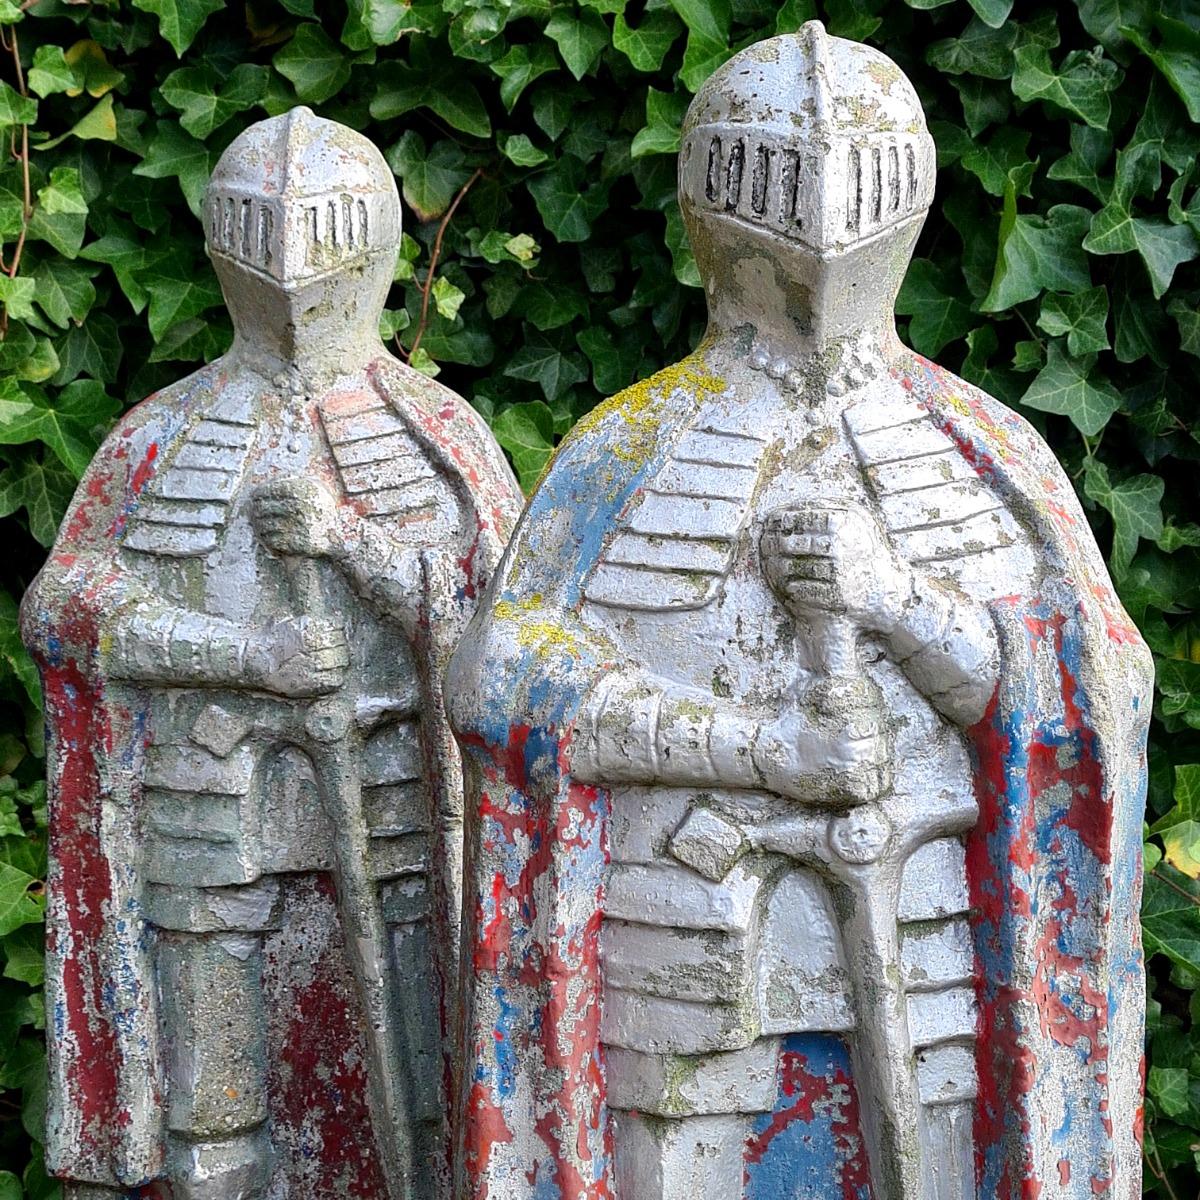 2 large cast stone knights